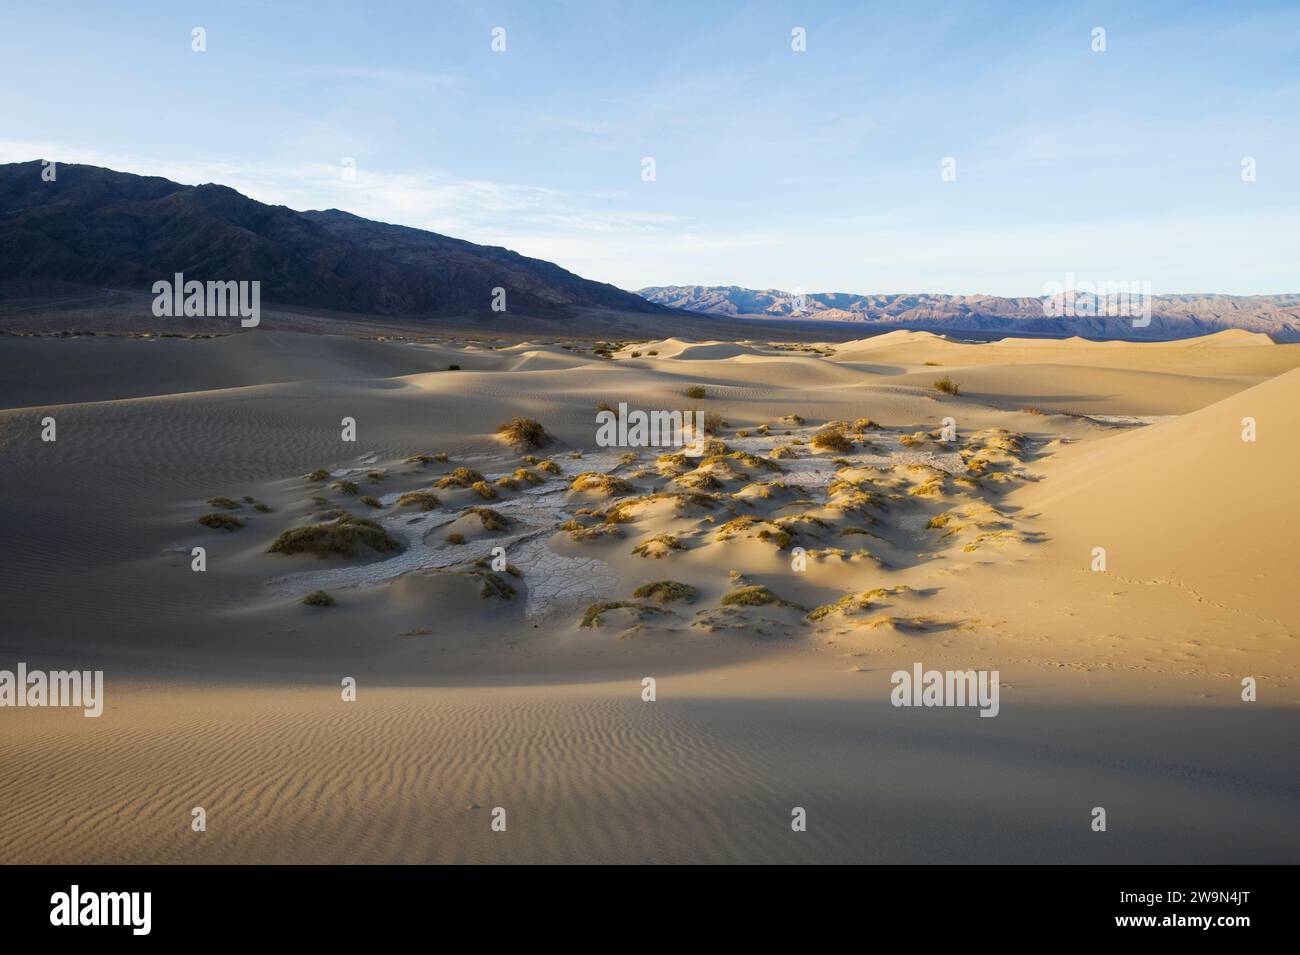 Looking out over the Mesquite Flat Sand Dunes in Death Valley National Park, CA. Stock Photo